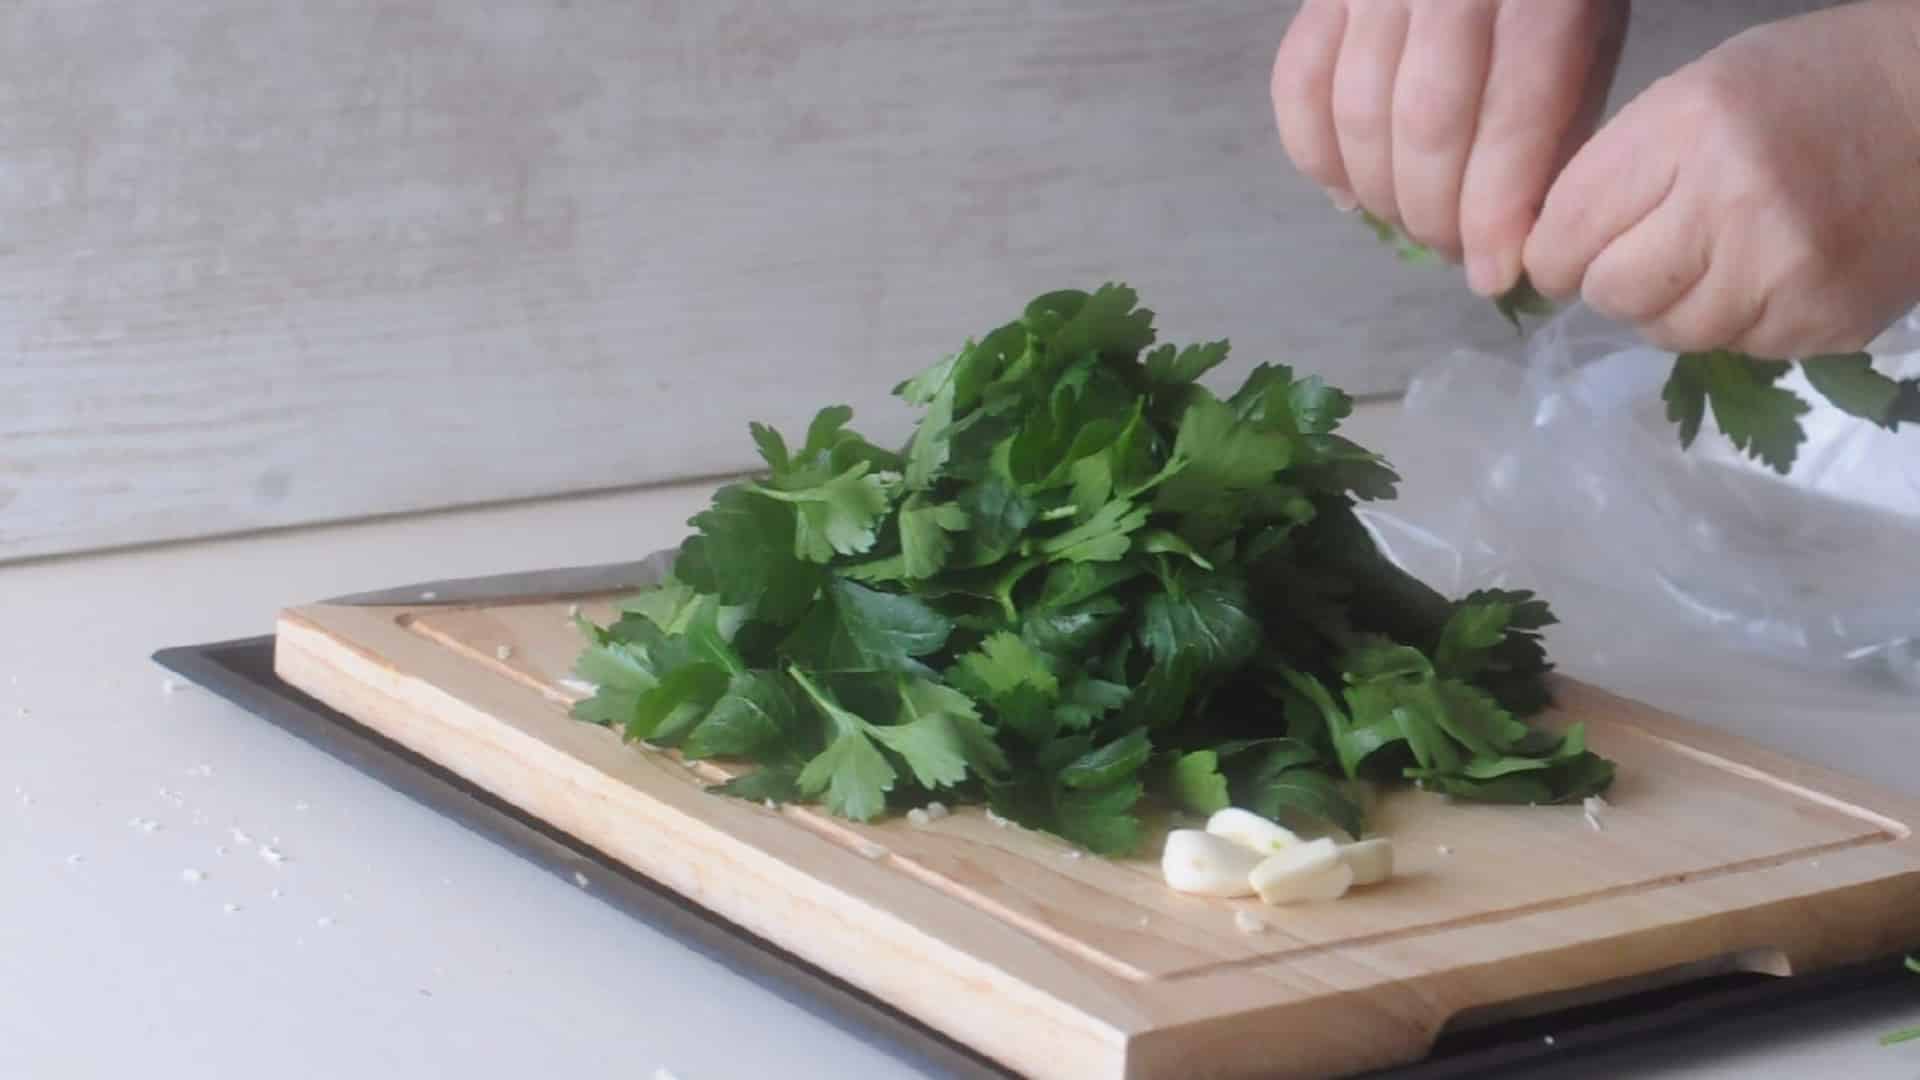 Wash and dry the fresh basil or parsley leaves and remove the stems